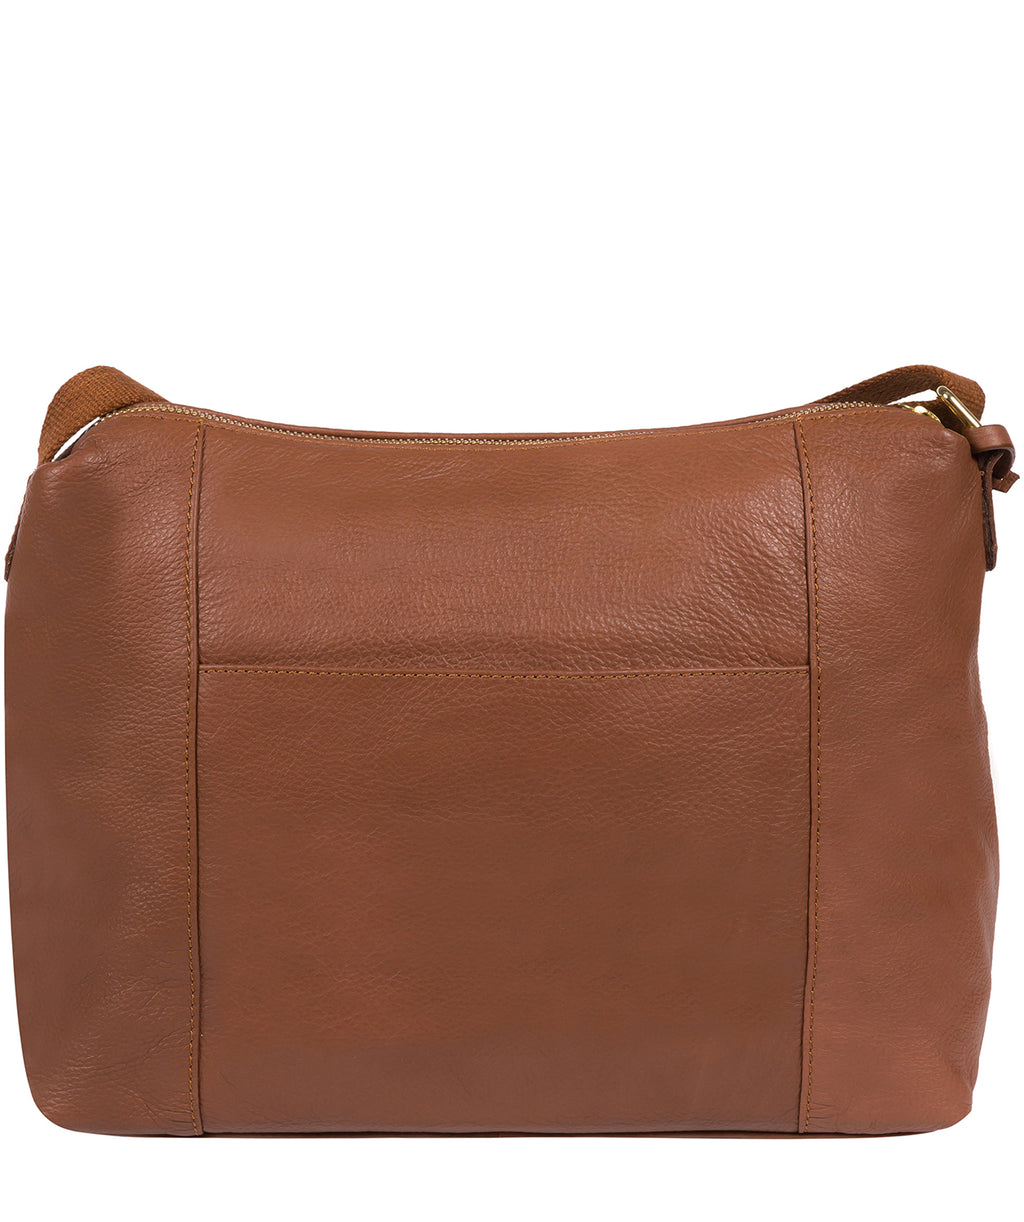 Tan Leather Shoulder Bag 'Chancery' by Cultured London – Pure Luxuries ...